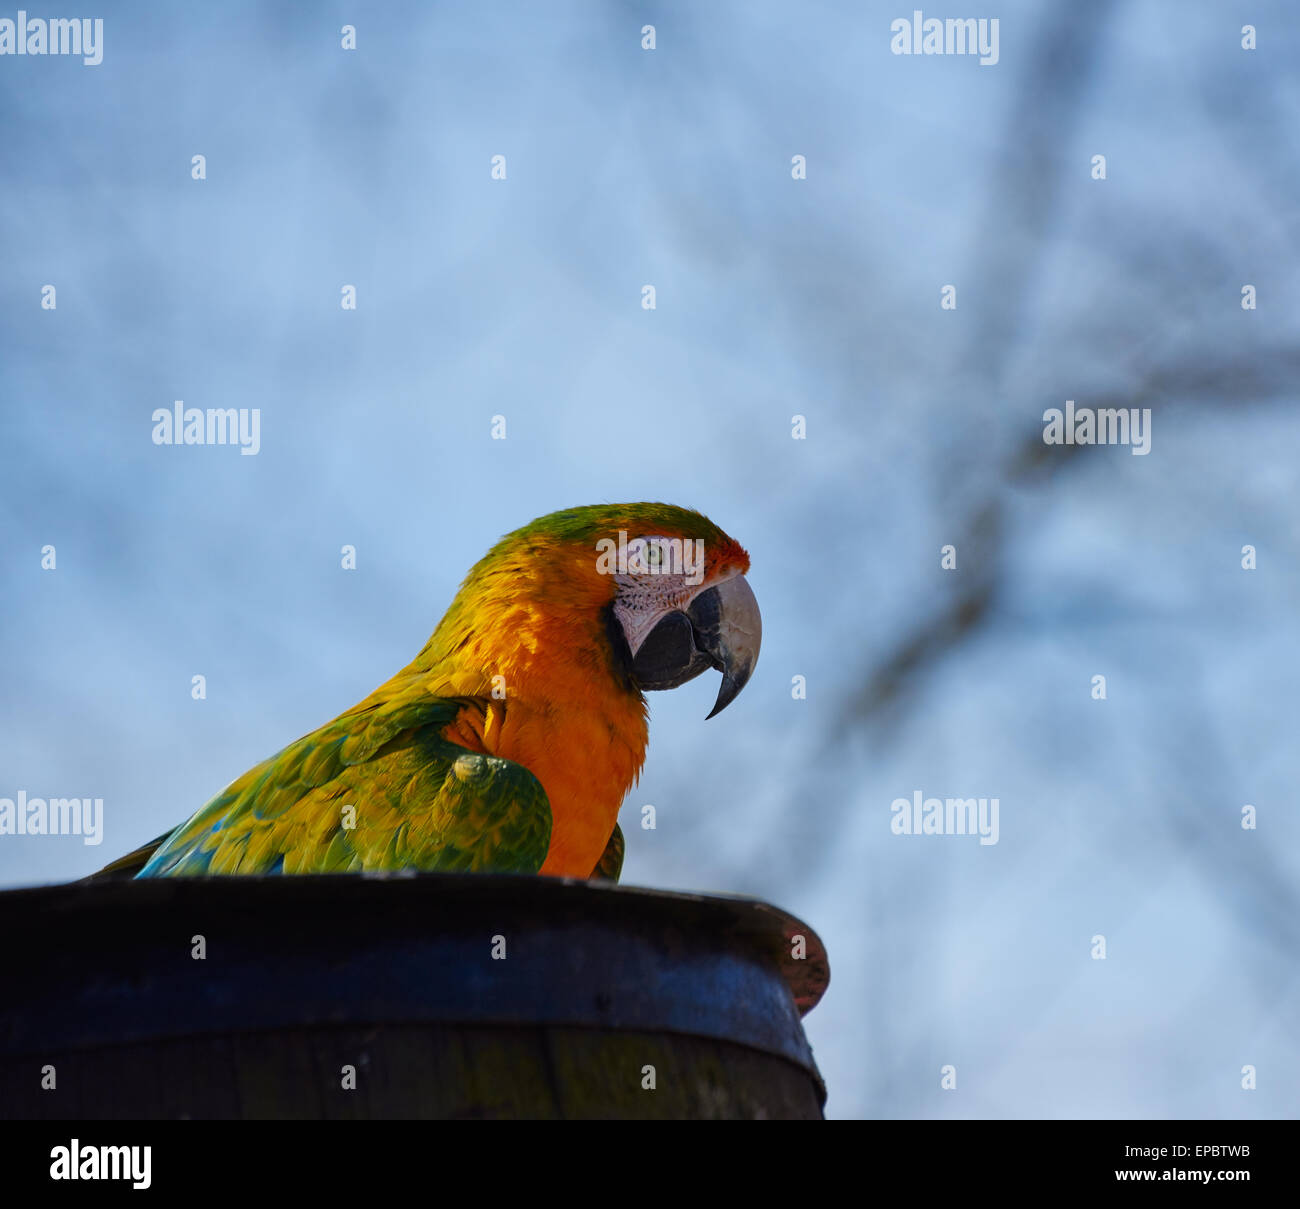 Gold and blue Macaw Parrot sitting on a barrel Stock Photo